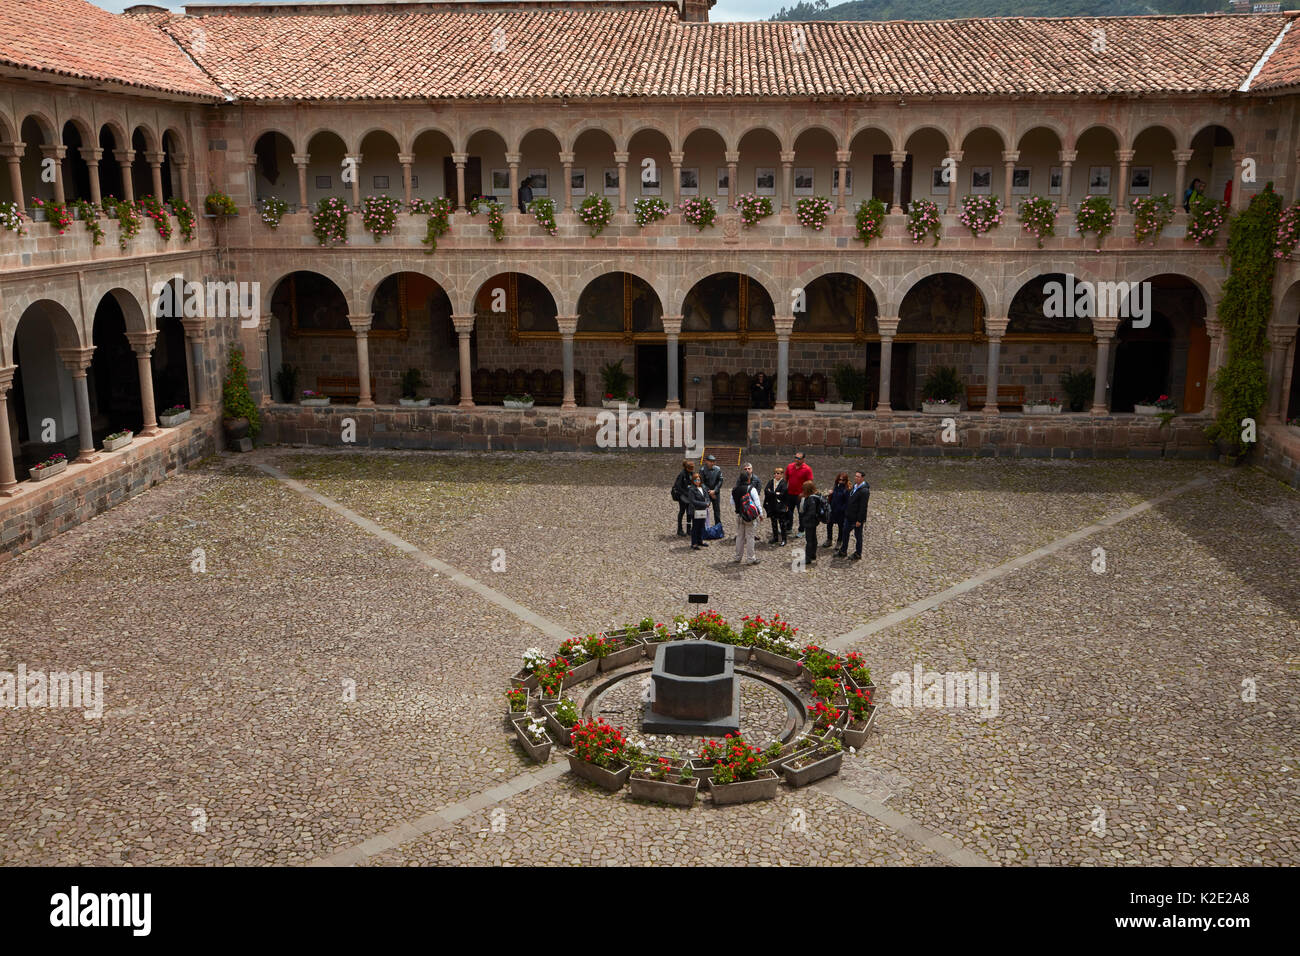 Courtyard at the Convent of Santo Domingo, built on the foundations of Coricancha Inca Temple, Cusco, Peru, South America Stock Photo